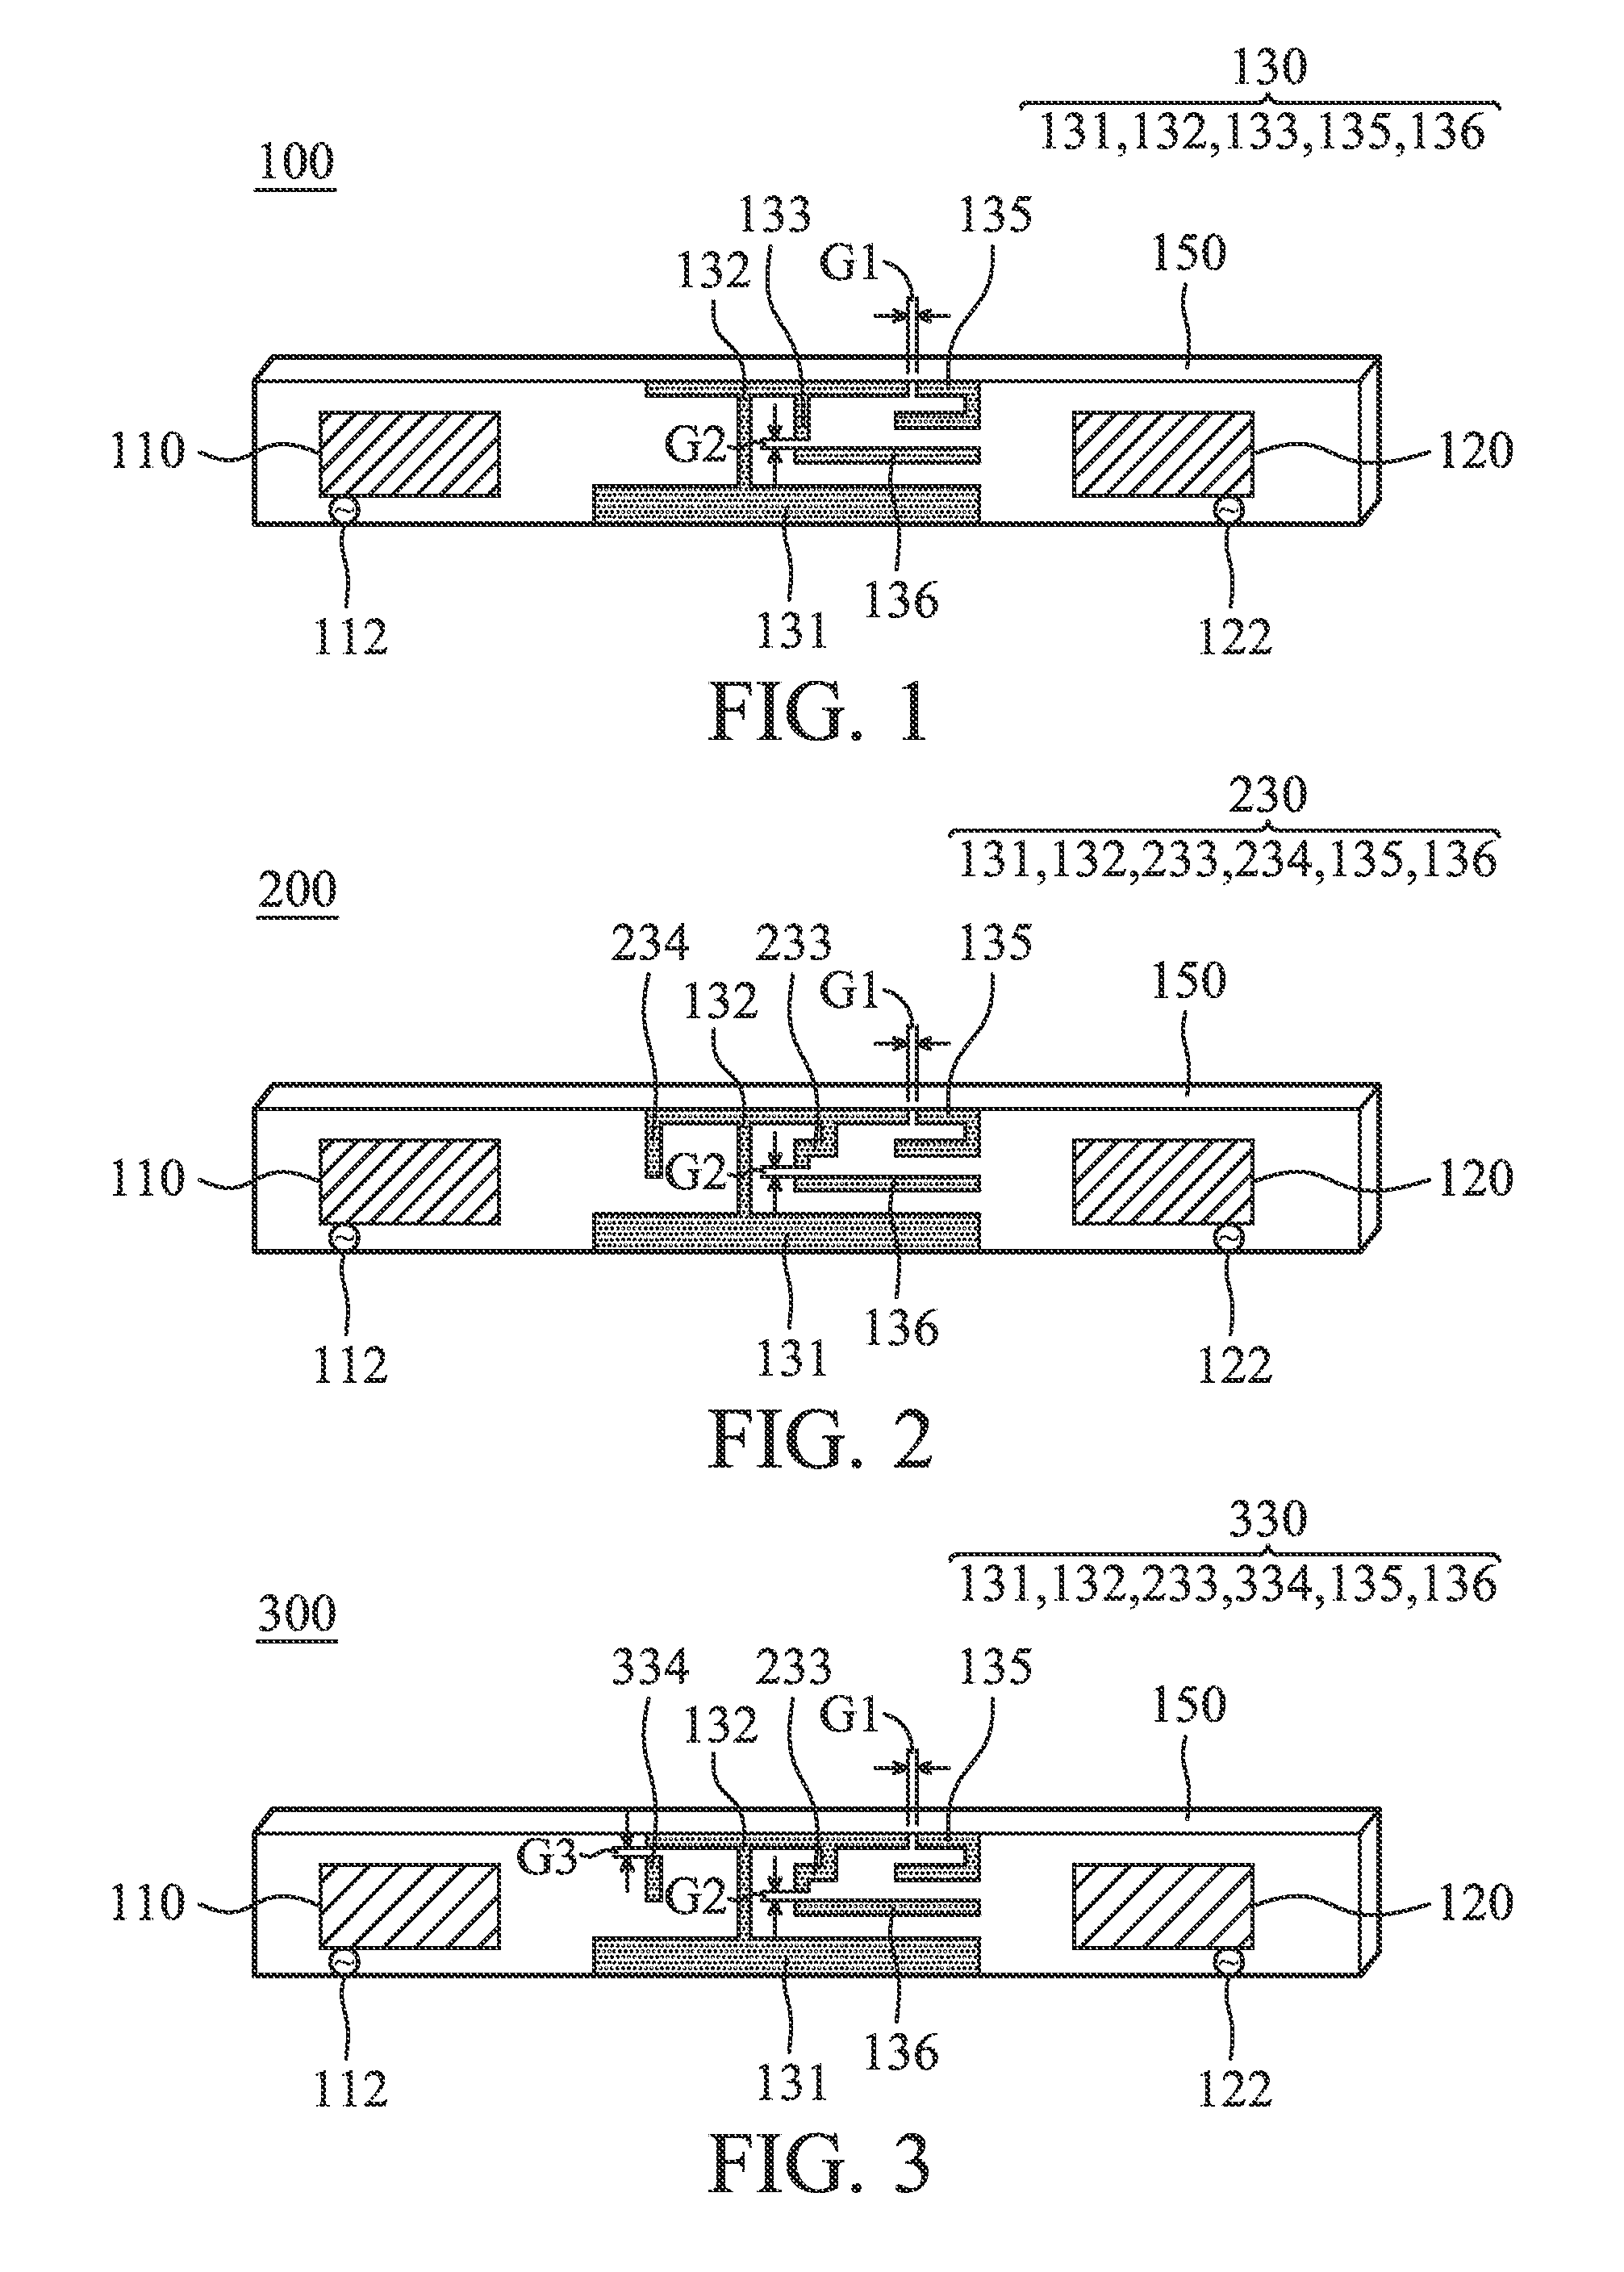 Antenna system with high isolation characteristics